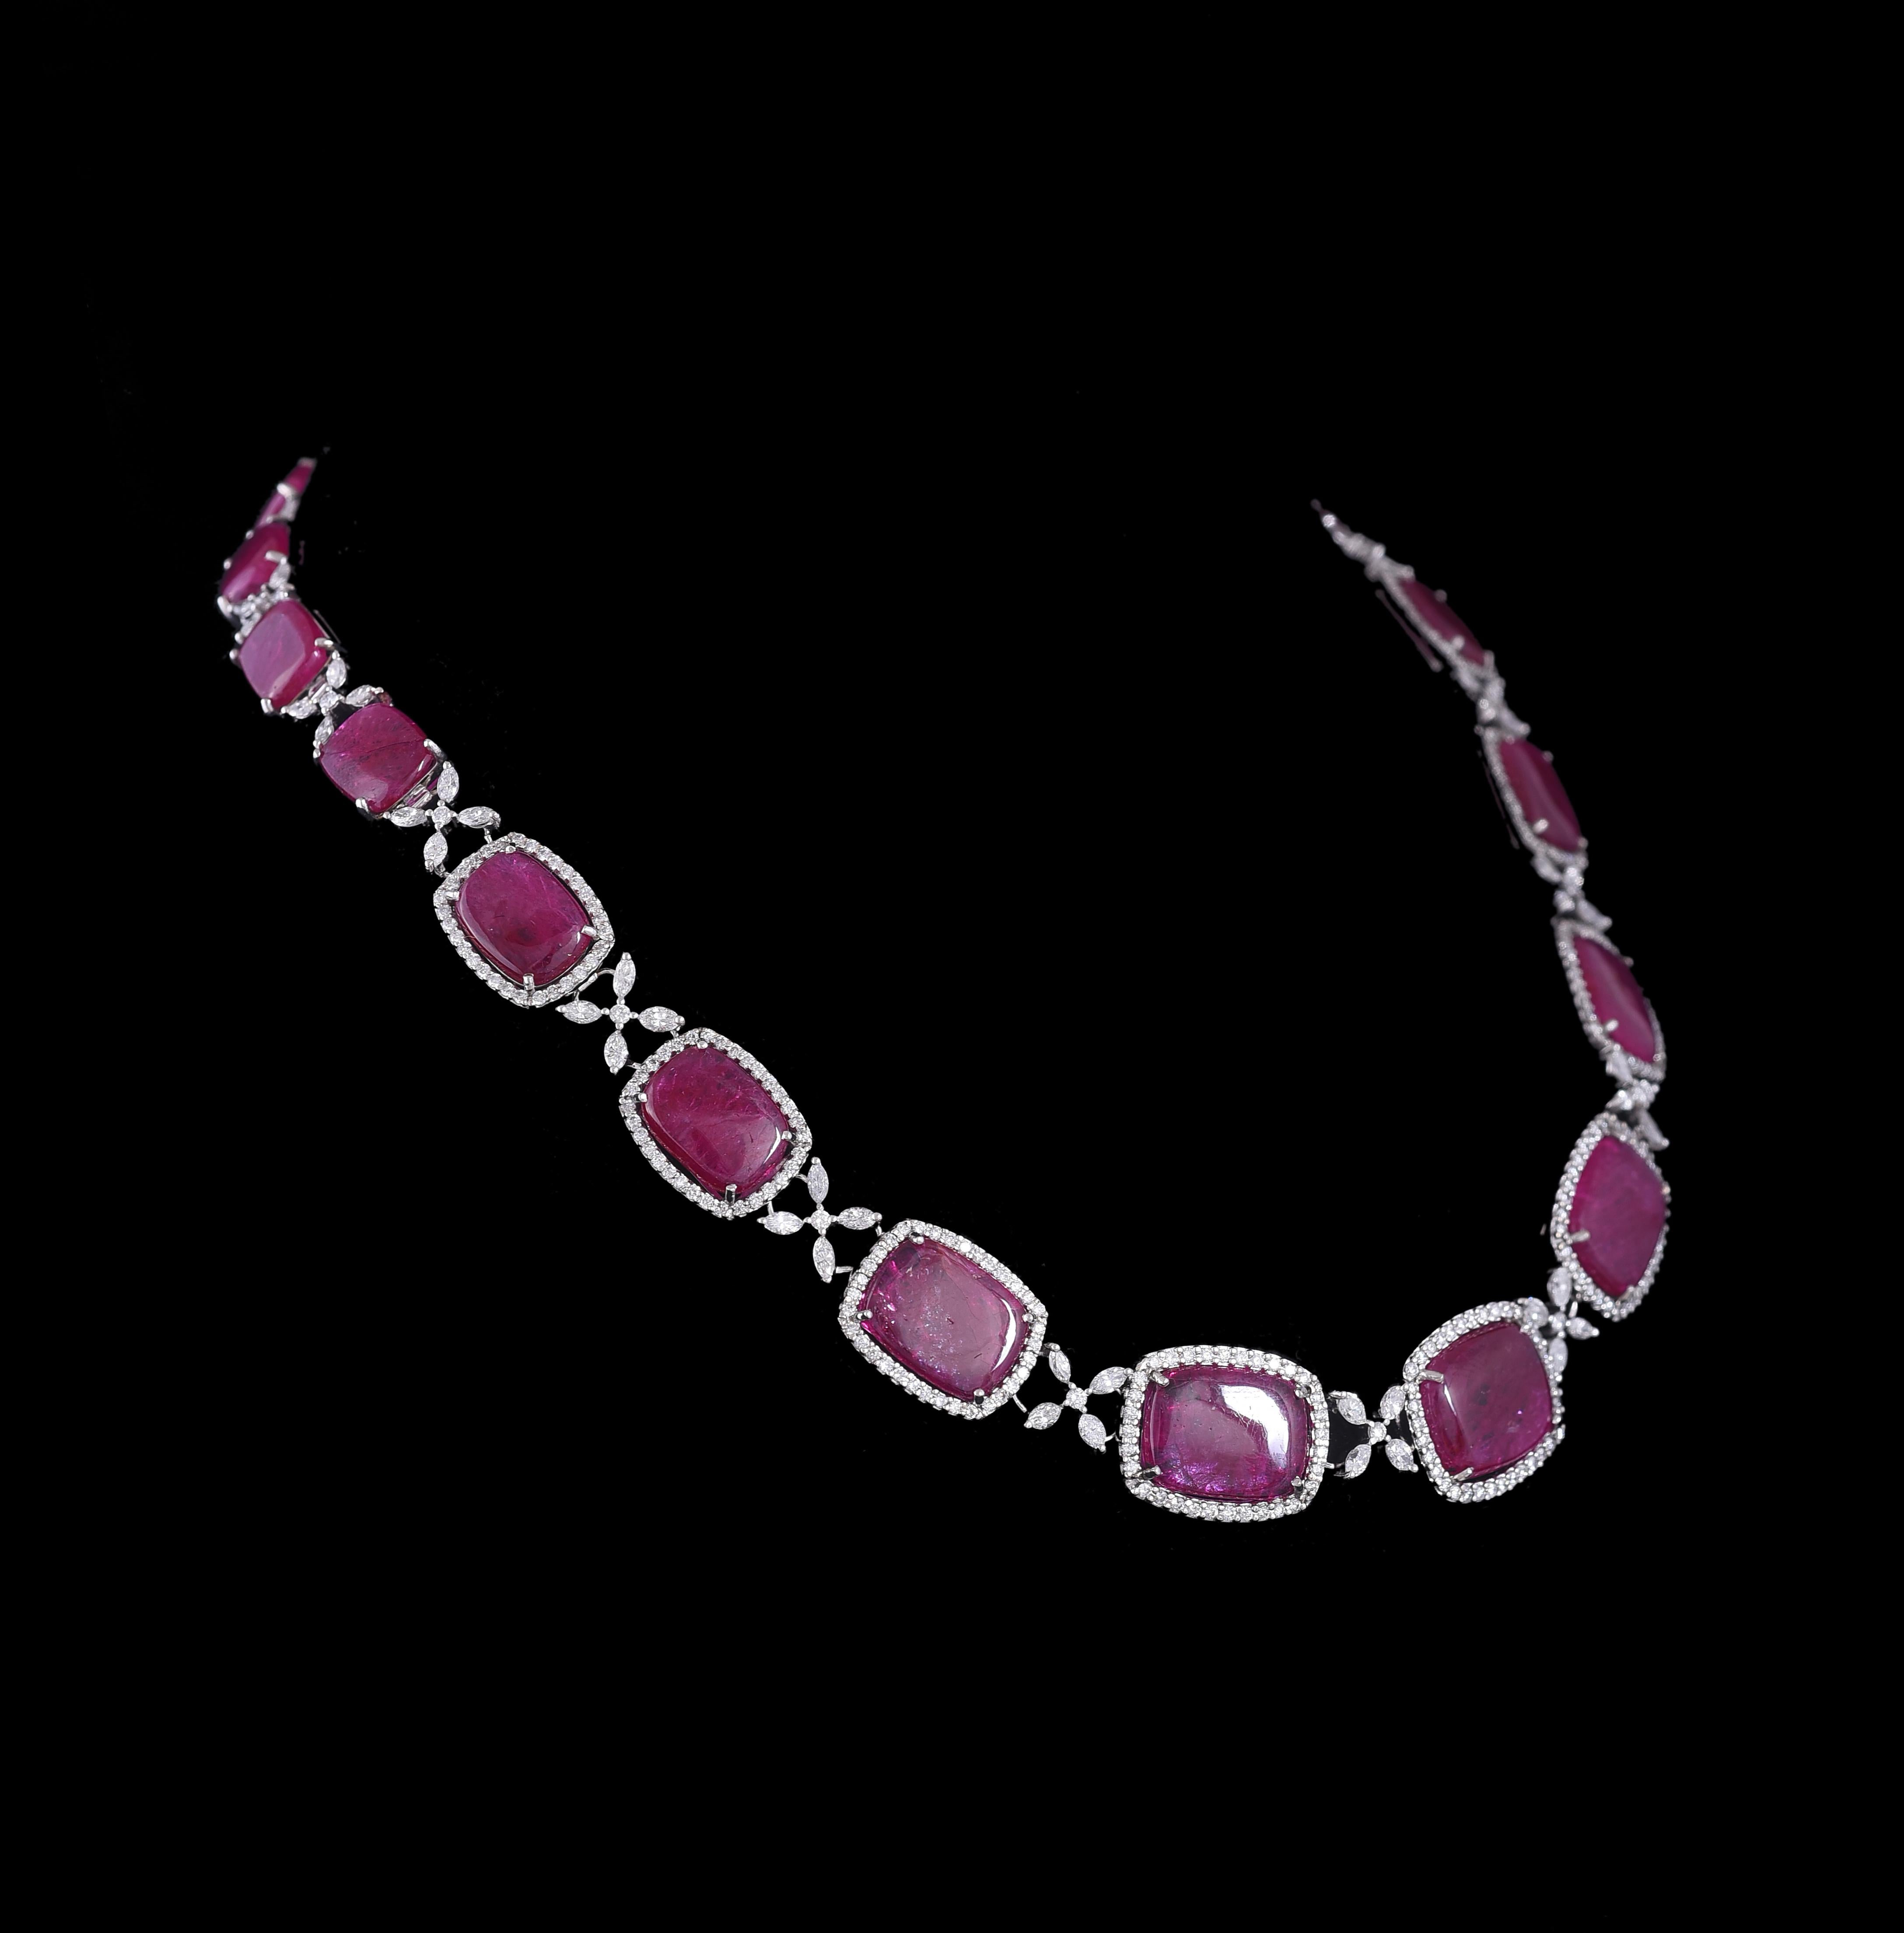 A very simple yet wearable Ruby Necklace Set in 18K White gold & Diamonds. The Necklace set consists of a pair of simple Ruby Earrings and a Ruby Necklace. All the Rubies in the Necklace set are completely natural without any treatment and originate